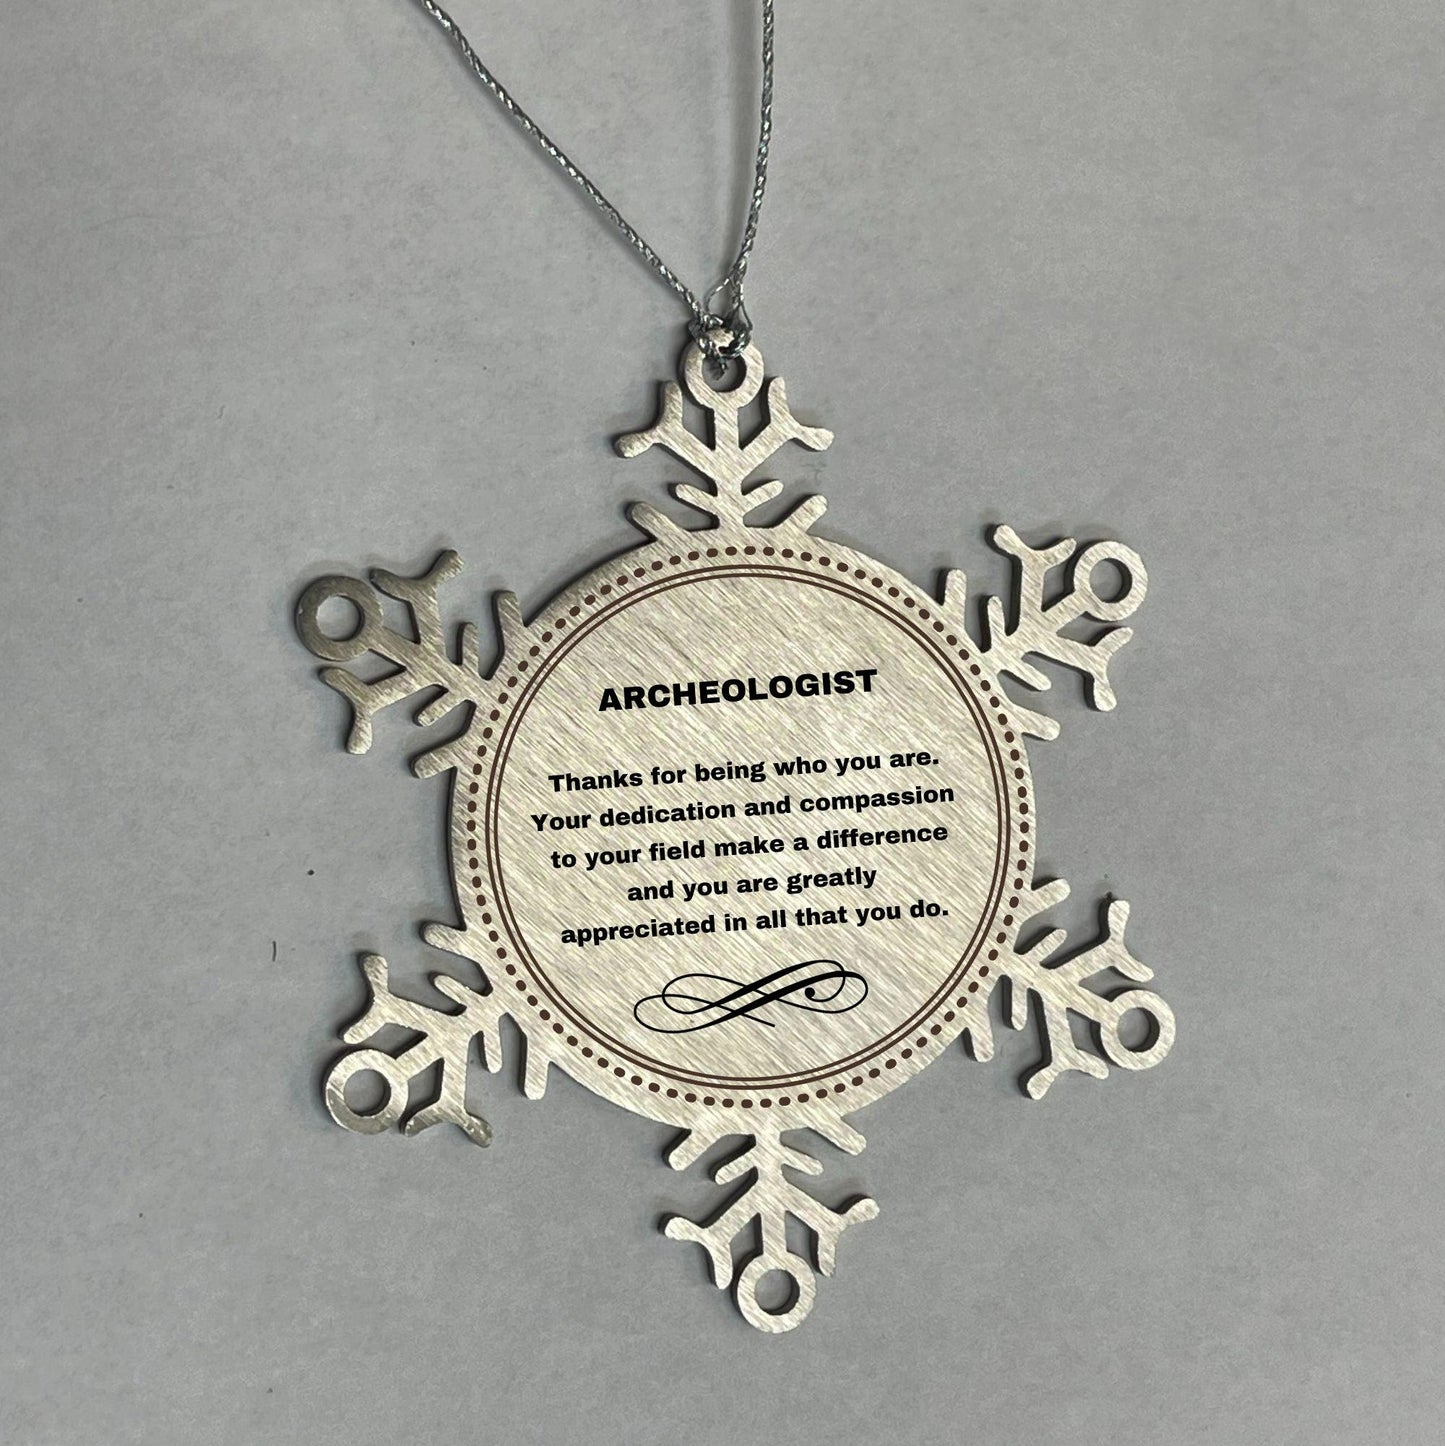 Archeologist Snowflake Ornament - Thanks for being who you are - Birthday Christmas Tree Gifts Coworkers Colleague Boss - Mallard Moon Gift Shop